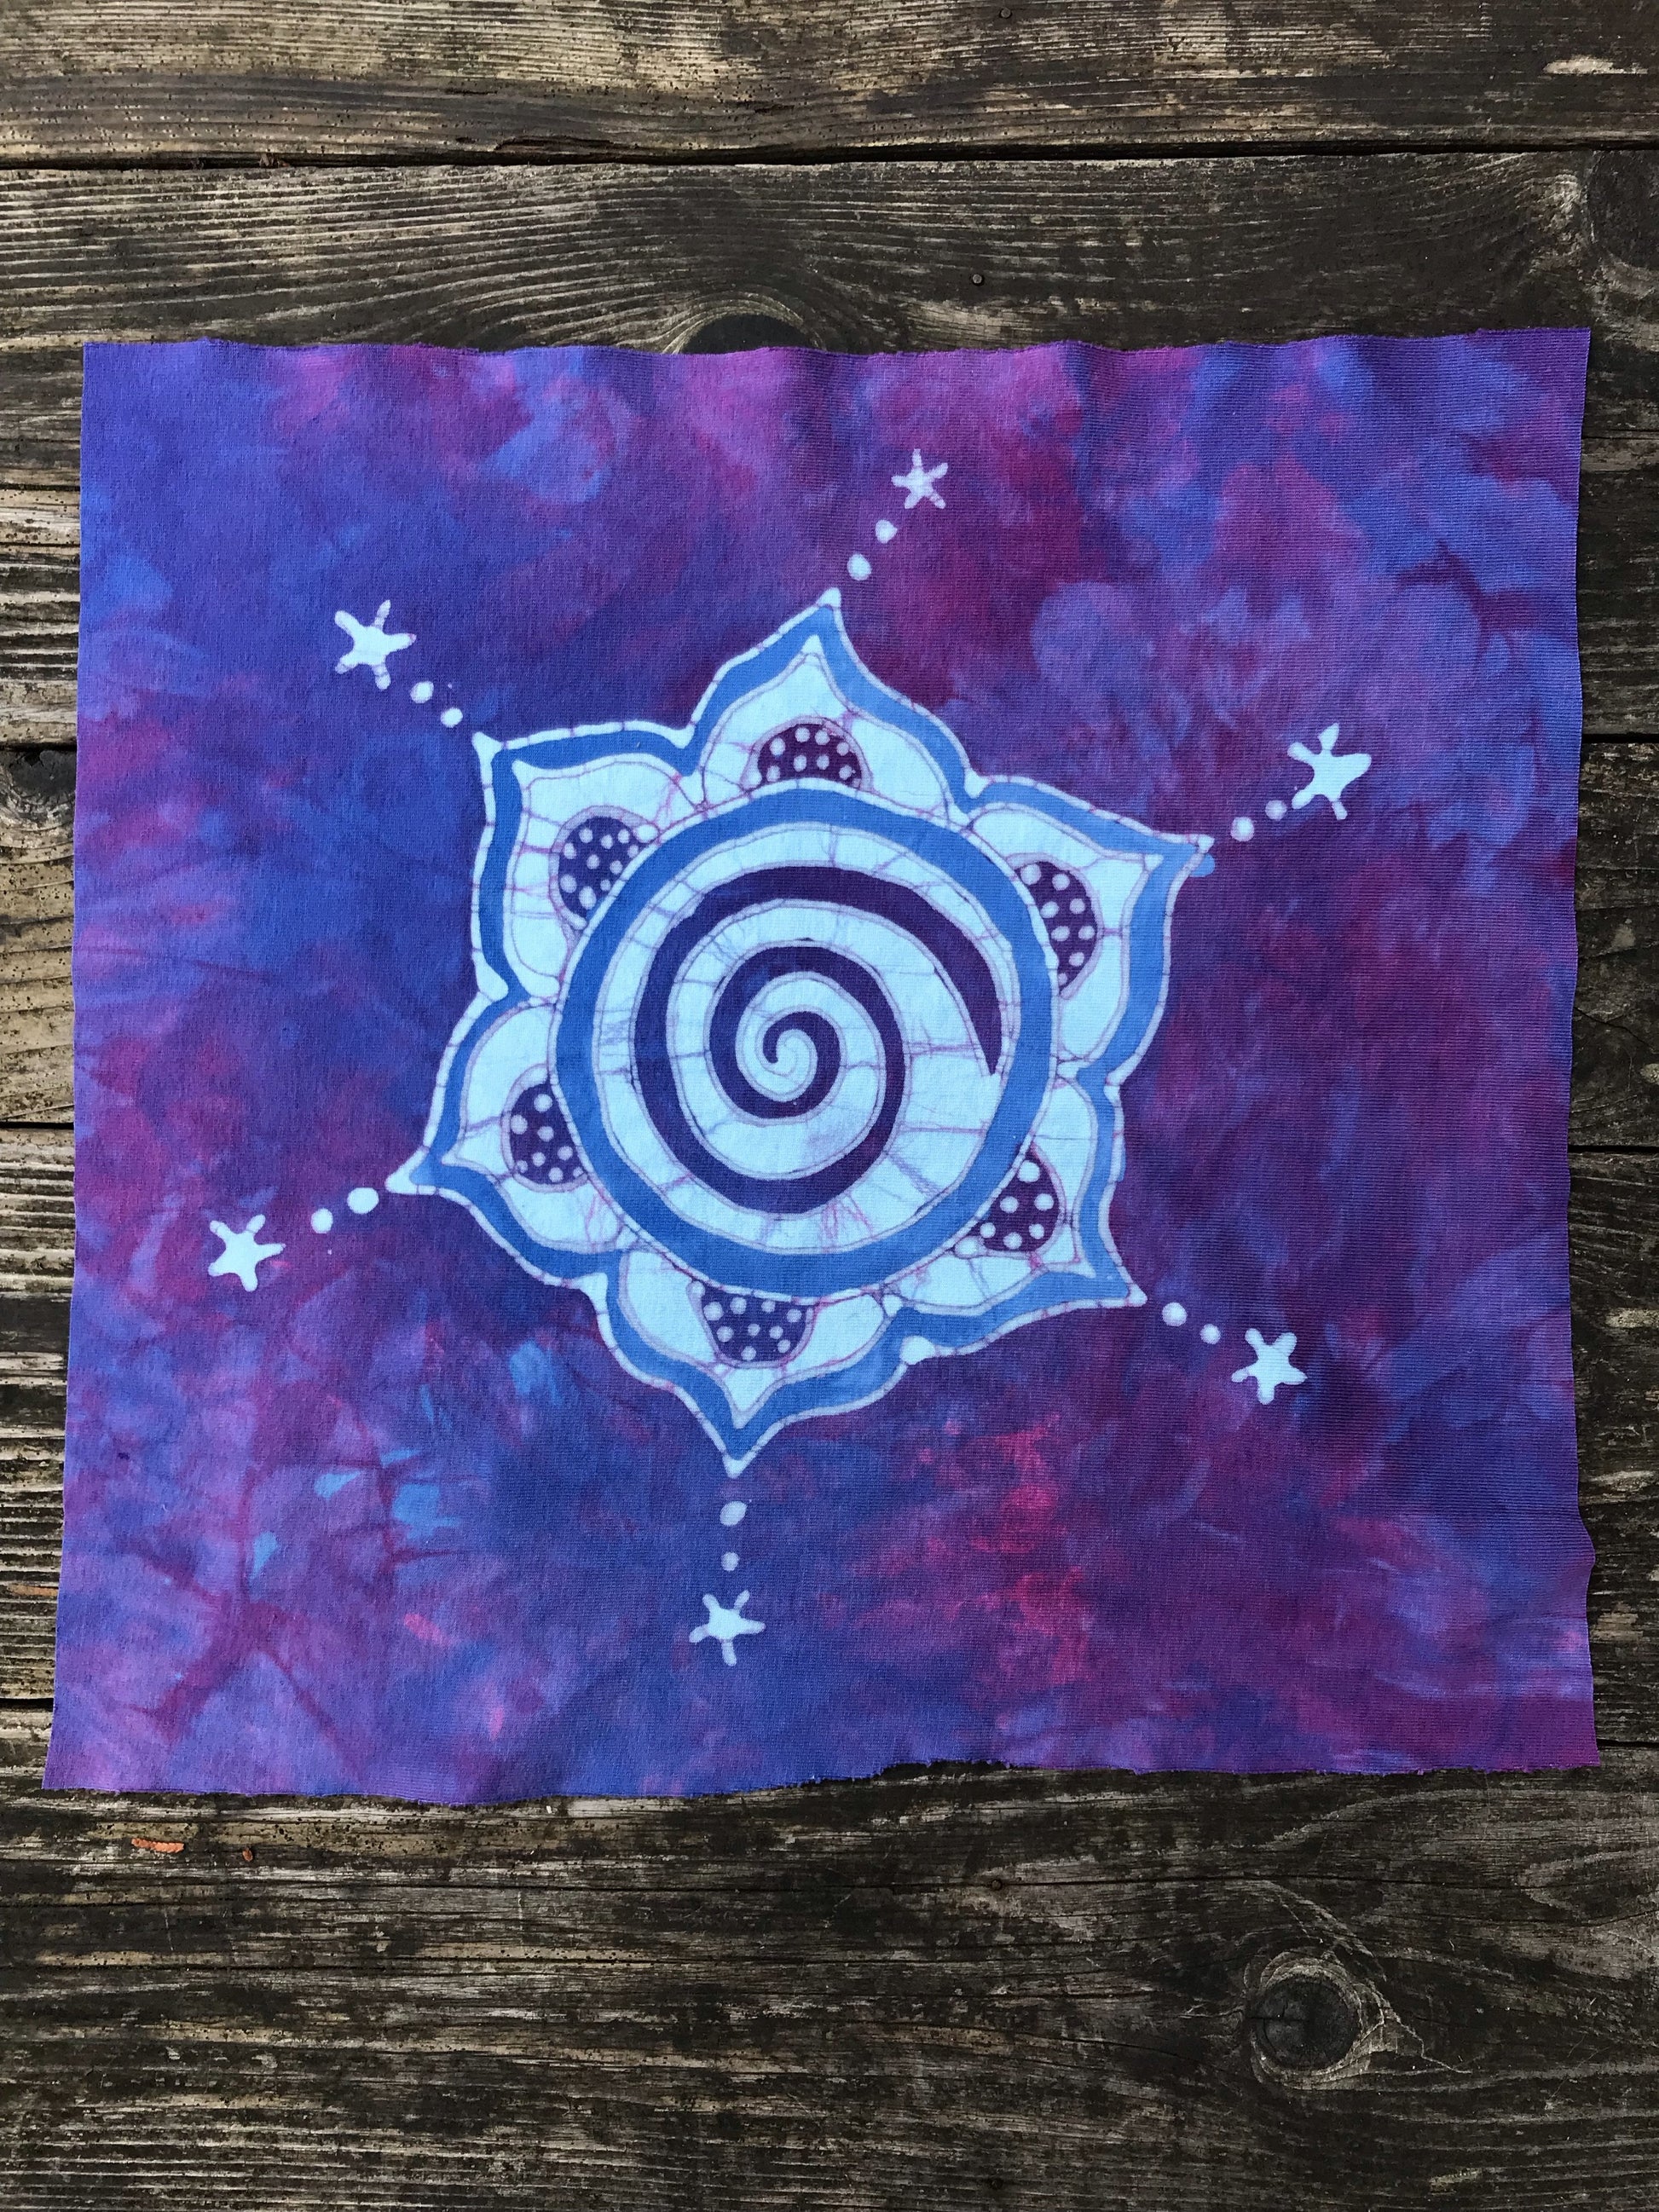 Hand Painted Batik Fabric Square - Swirling Star Flower in Purple and Periwinkle Batikwalla by Victoria 